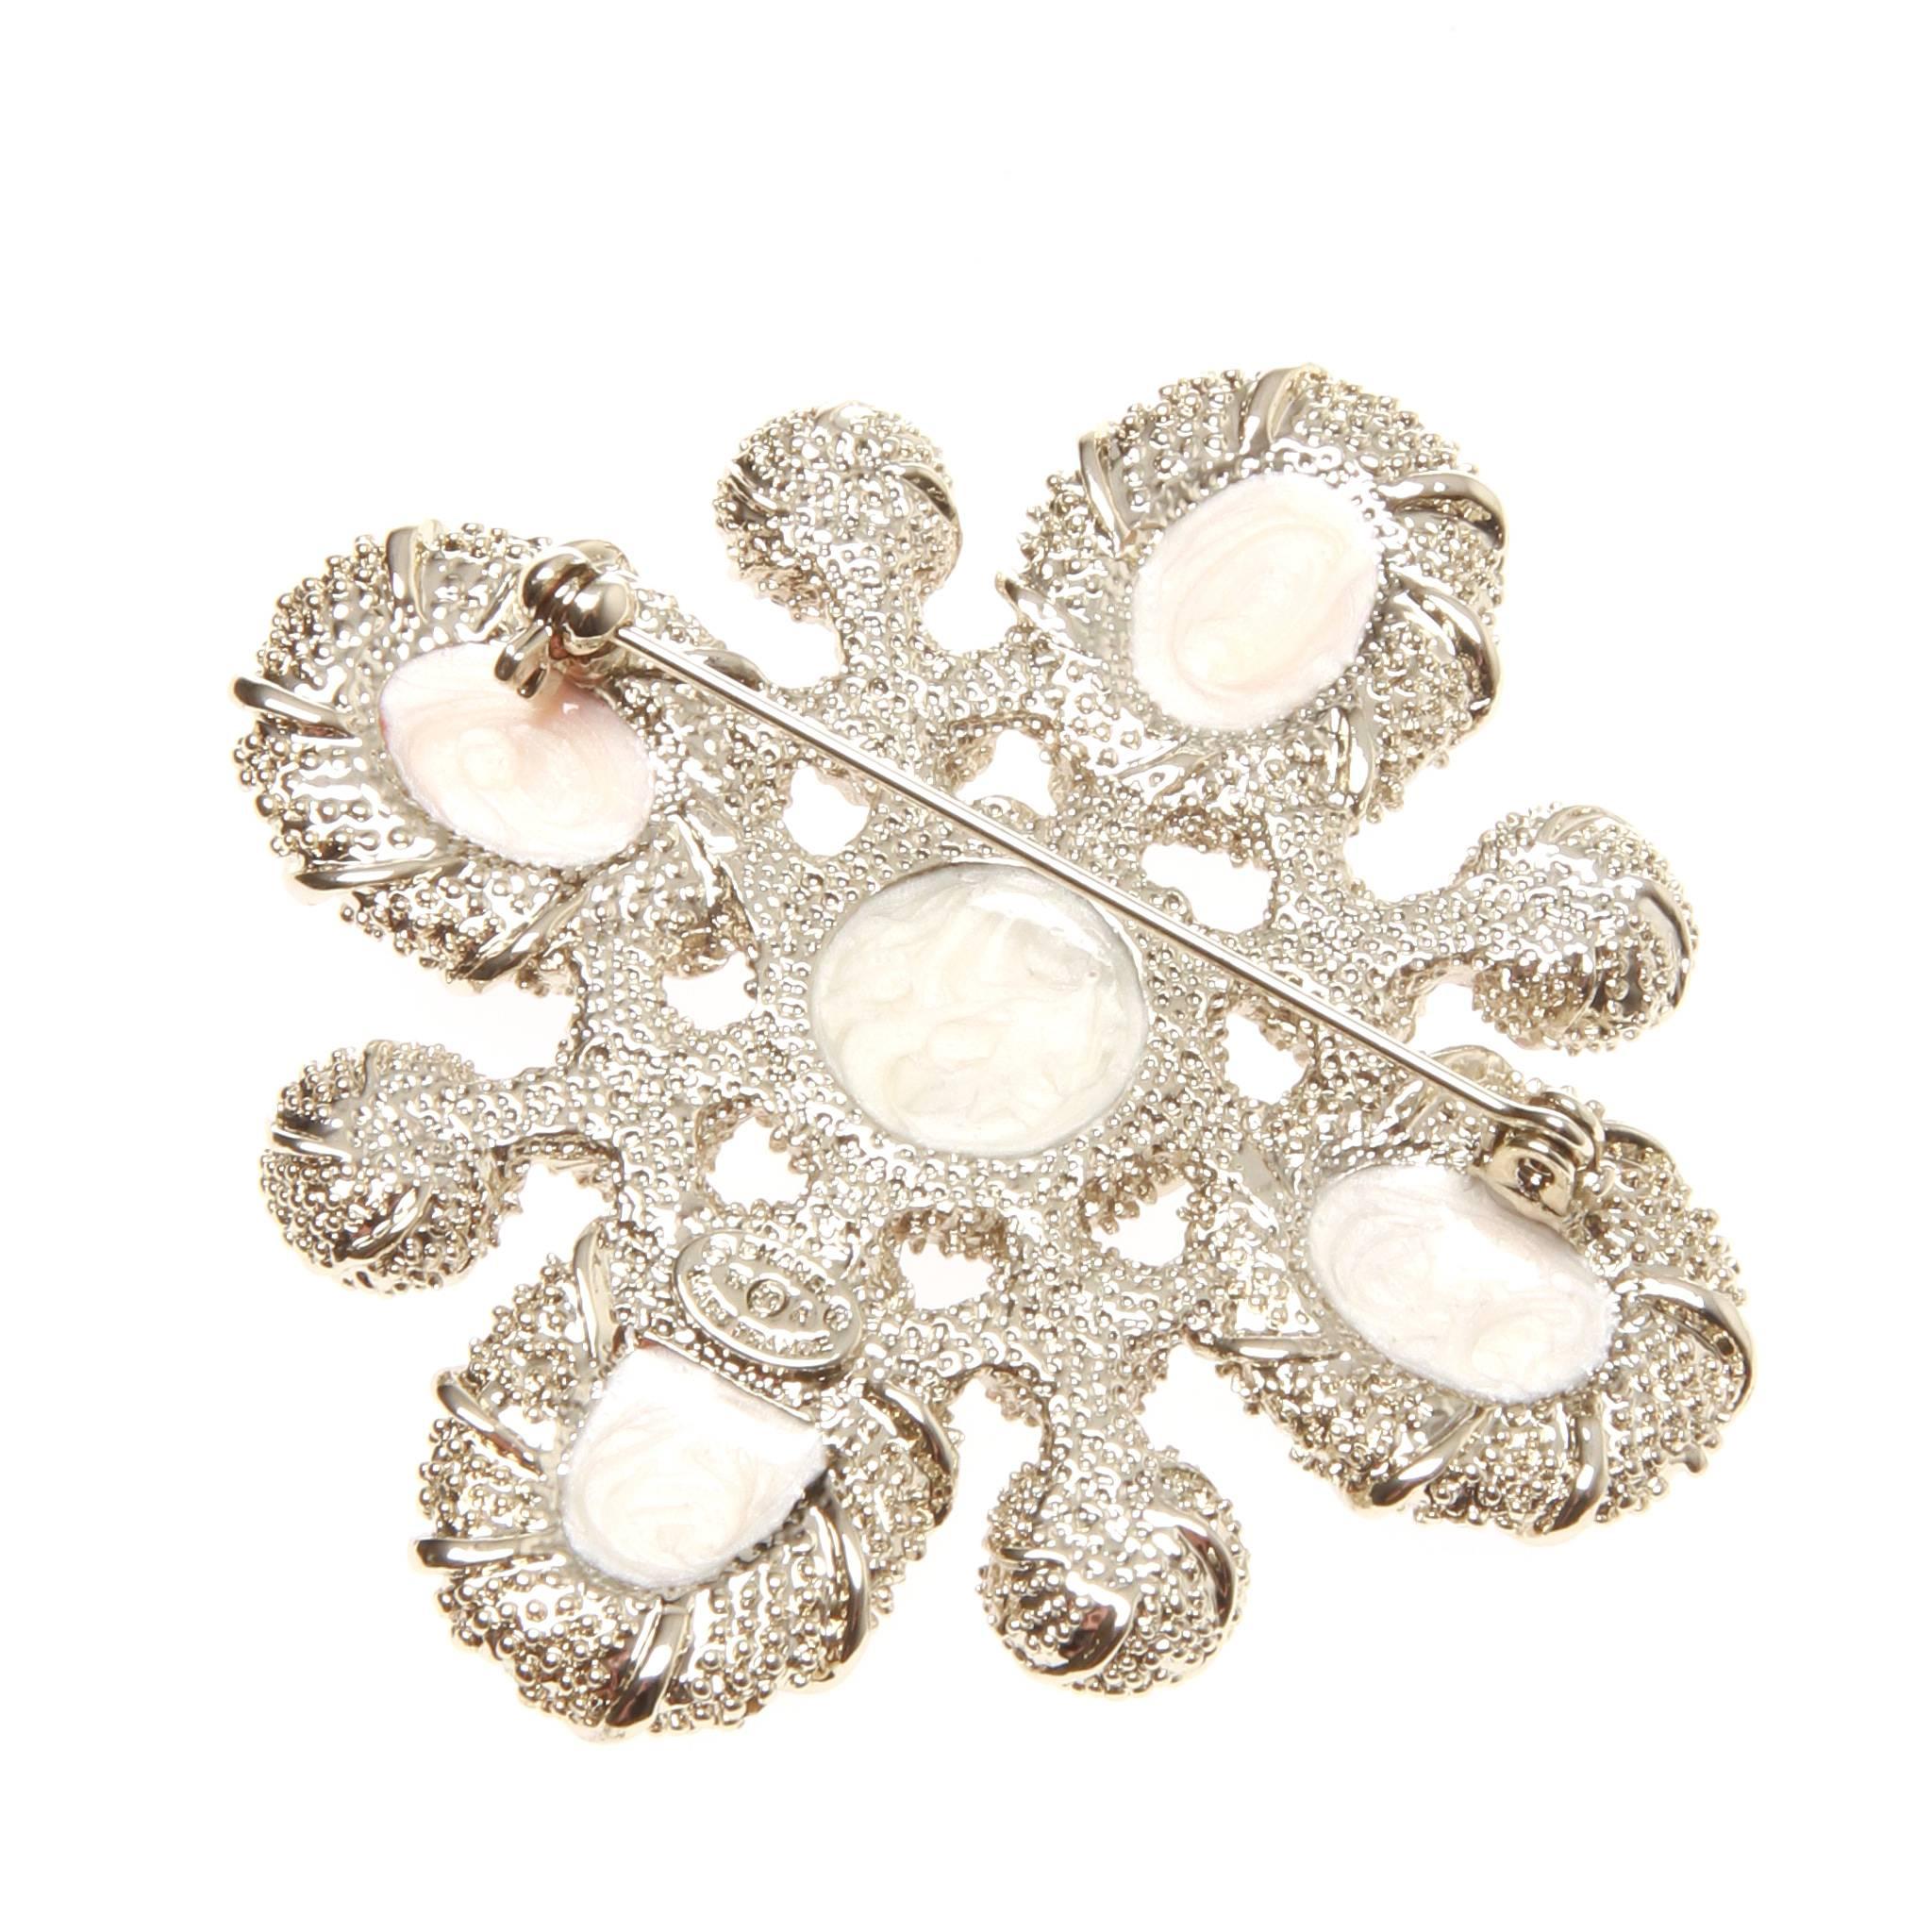 Chanel CC brooch marked 12 A (Autumn 2012) and featuring a beautiful carnelian, pearl look and Swarovski crystal accented silver-tone design. 

Roll pin fastening at back. Comes with original and authentic box. 
